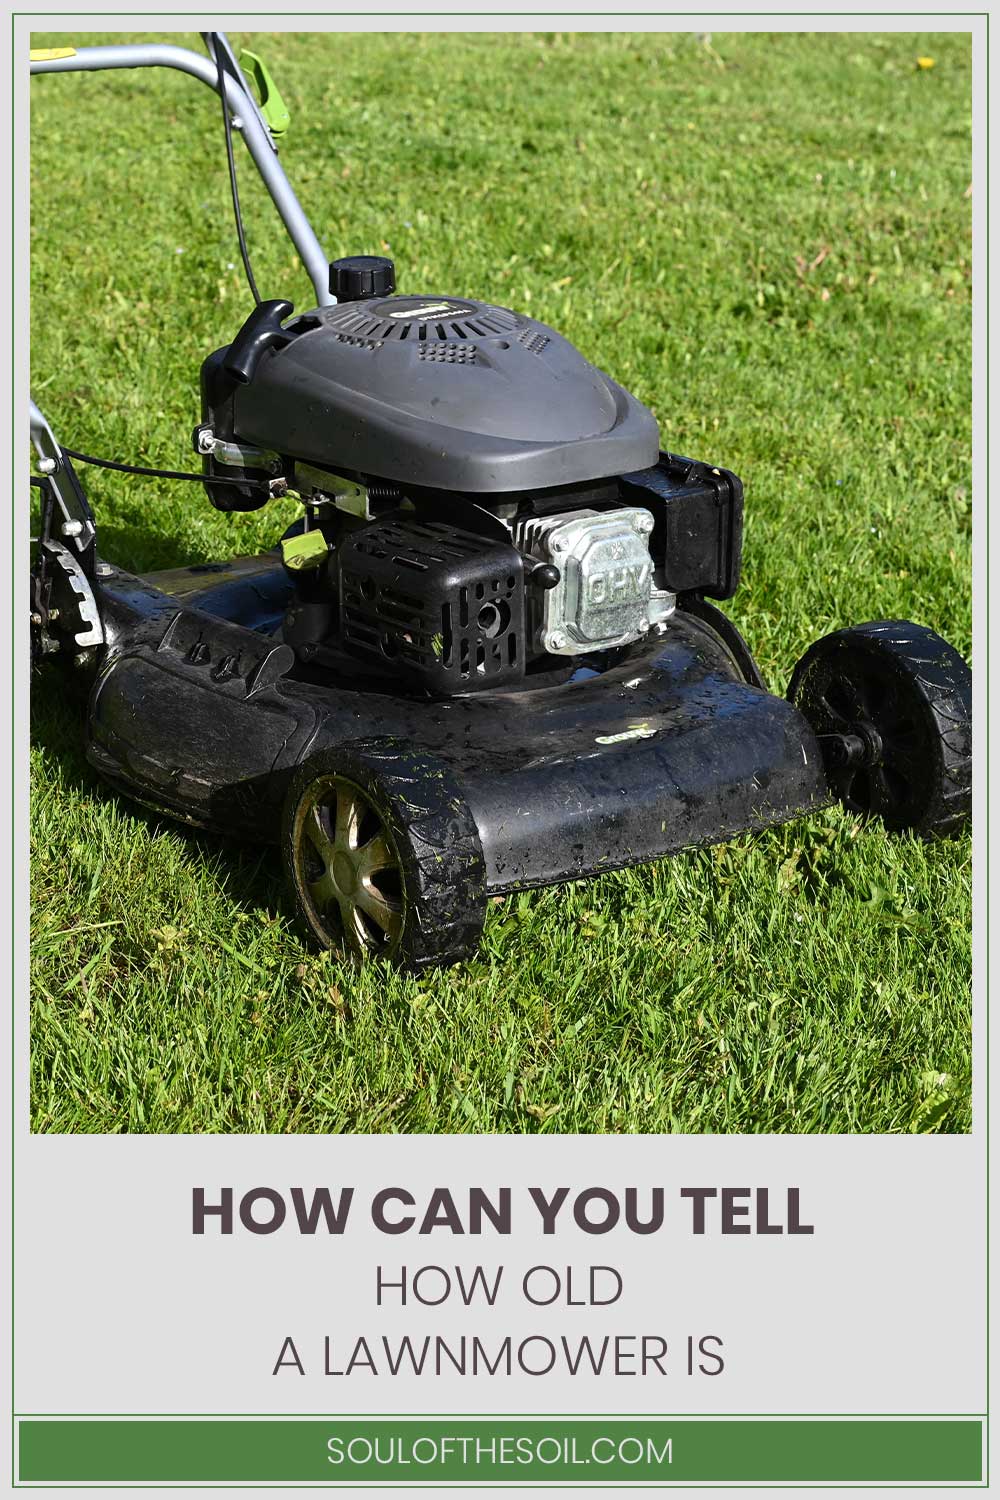 How Can You Tell How Old A Lawnmower Is